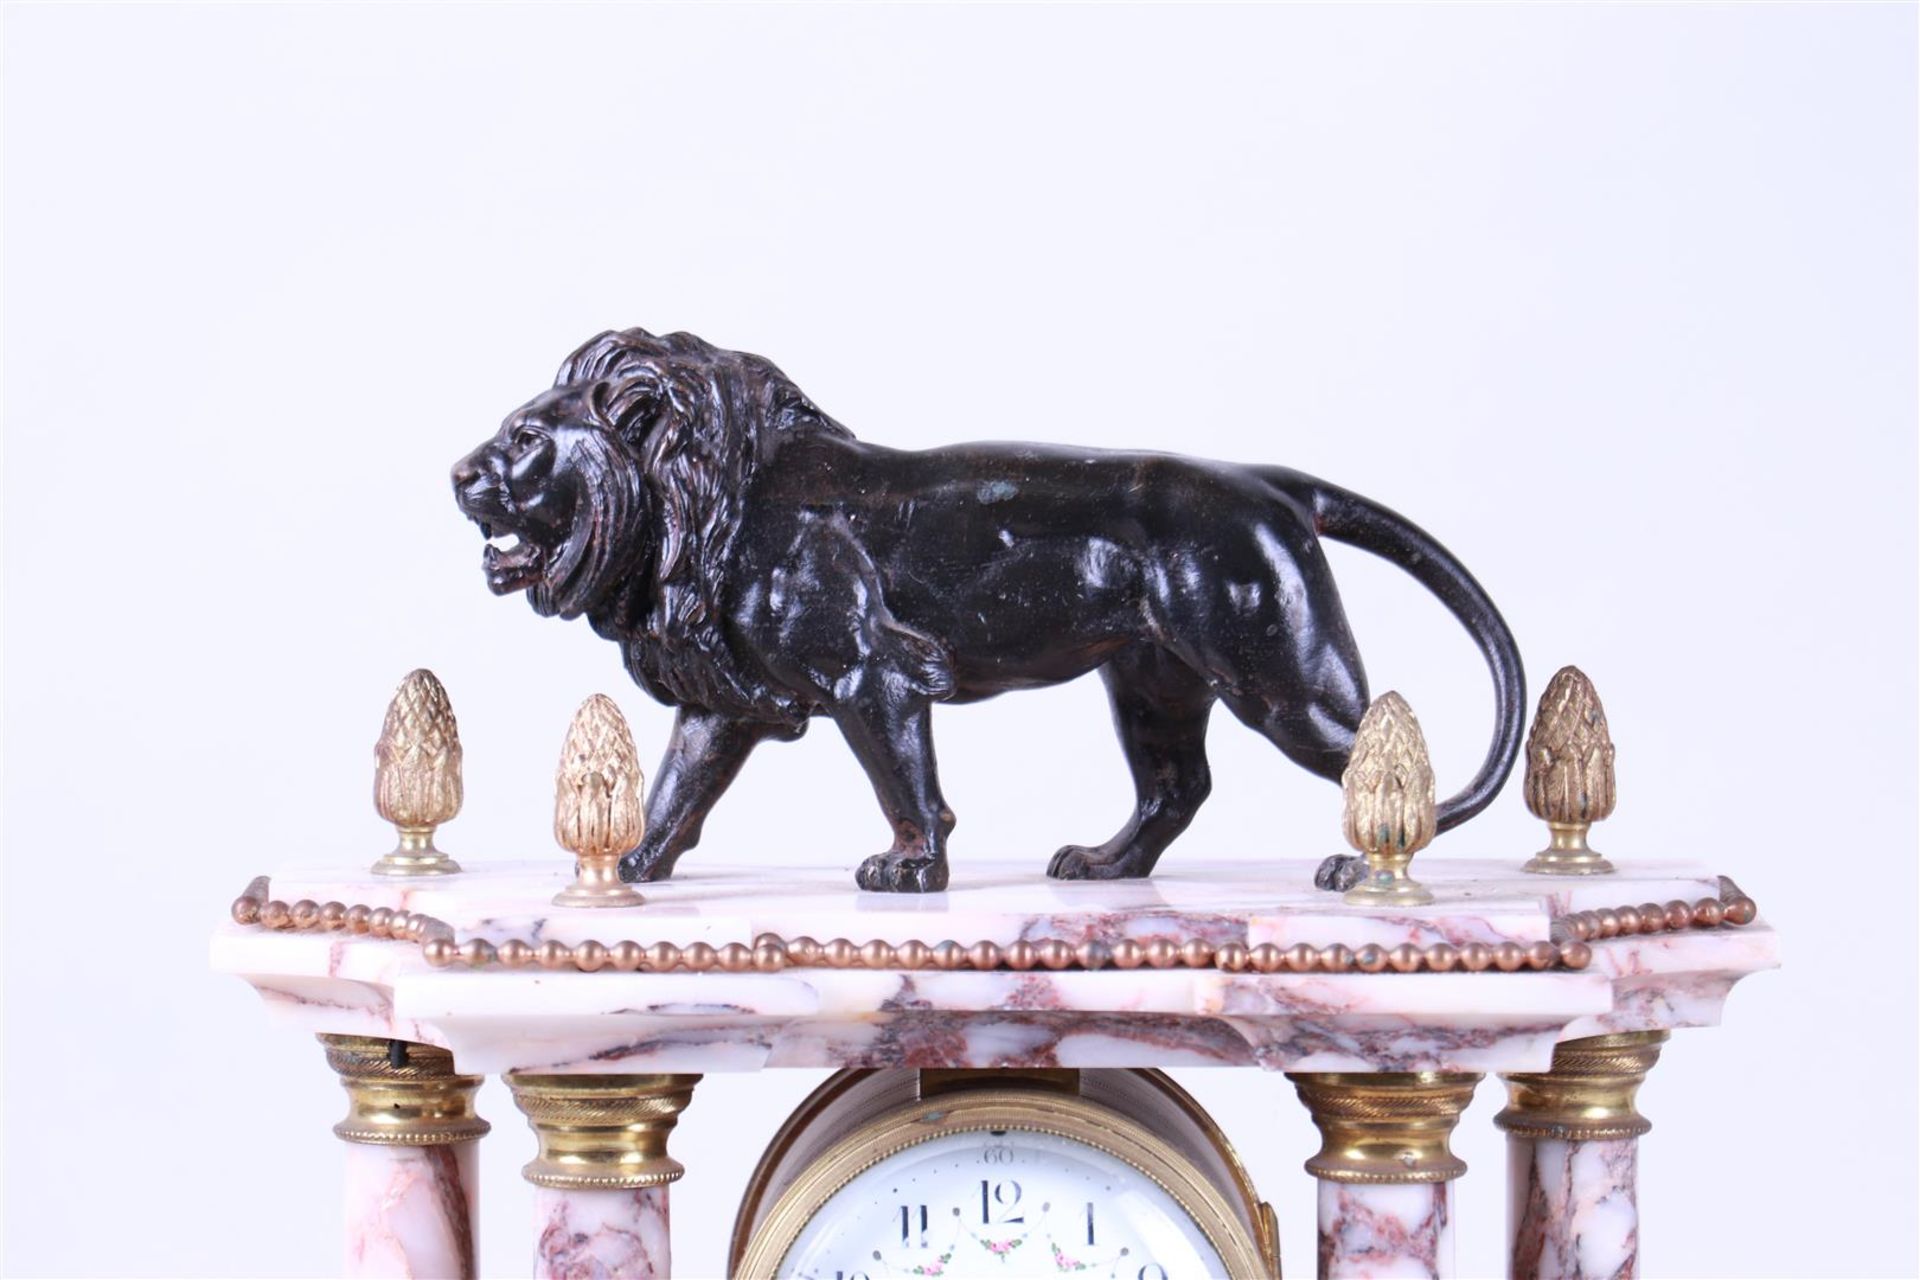 Majestic Lion-Topped Marble Column Clock: A 19th Century Mantel Timepiece - Image 2 of 3